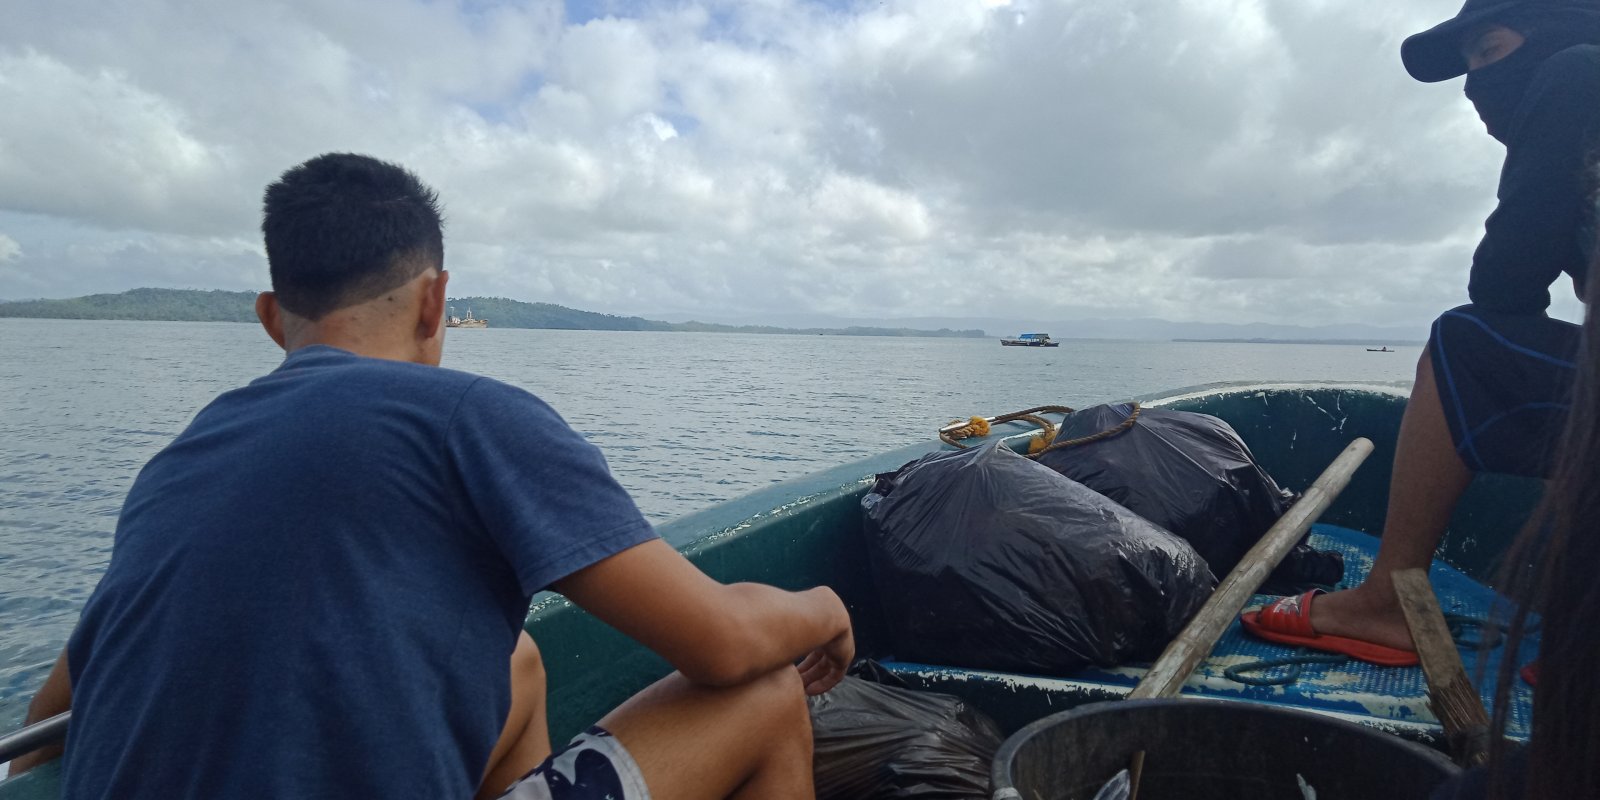 taken after the group gathered trash from Panalaron Bay, Tacloban City, Philippines